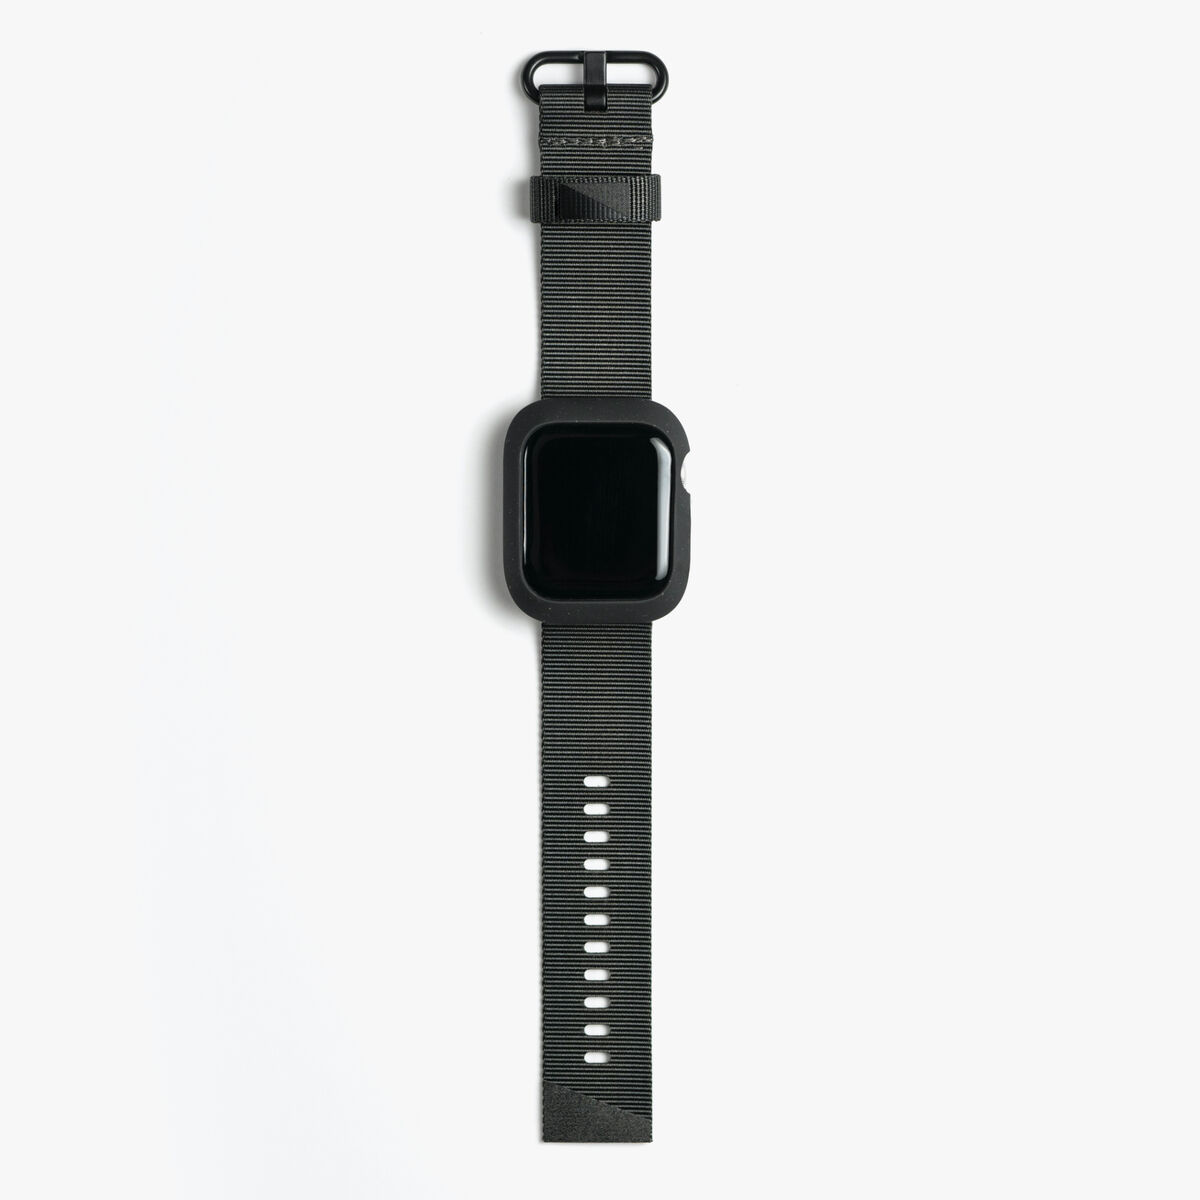 Moab Case + Band (Black) for Apple Watch Series 6 / Watch SE / Watch Series 5 / Watch Series 4 - 44mm,, large